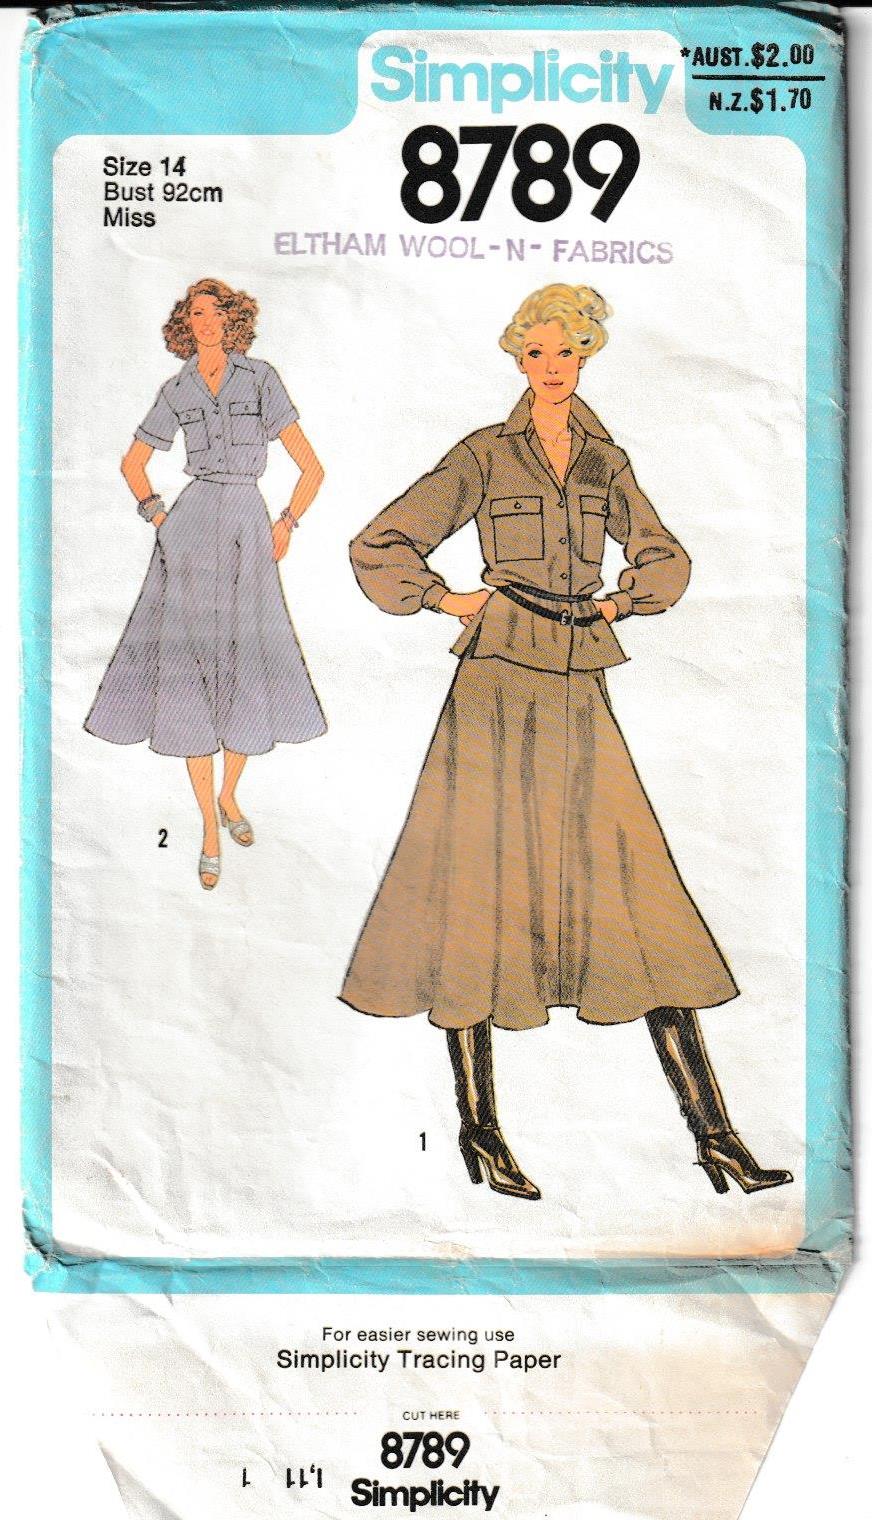 vintage sewing pattern flared skirt and blouse with patch pockets simplicity 8789 1979 1970s